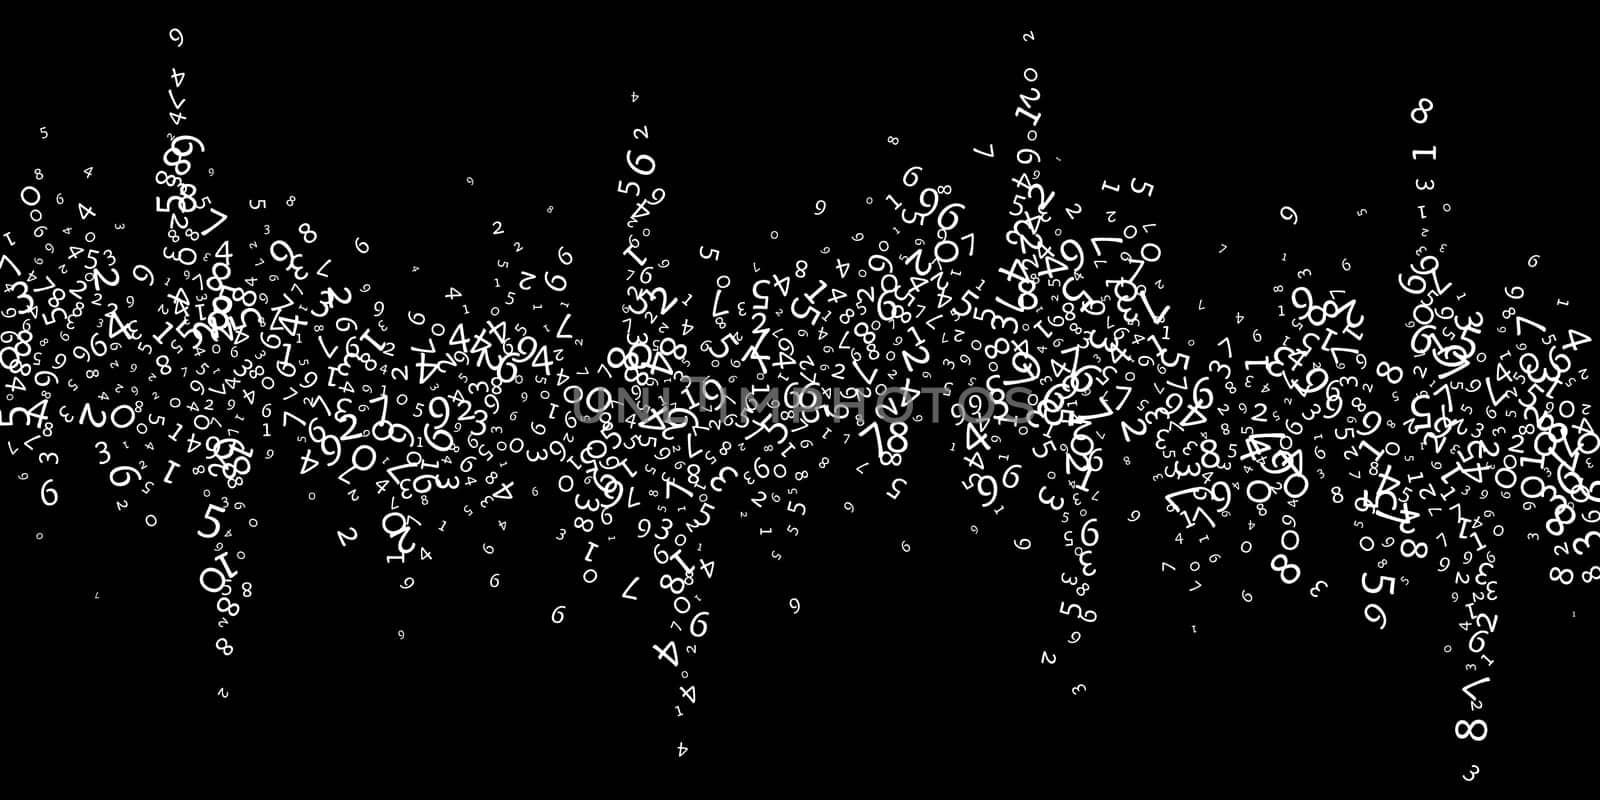 Falling numbers, big data concept. Binary white messy flying digits. Modern futuristic banner on black background. Digital illustration with falling numbers.